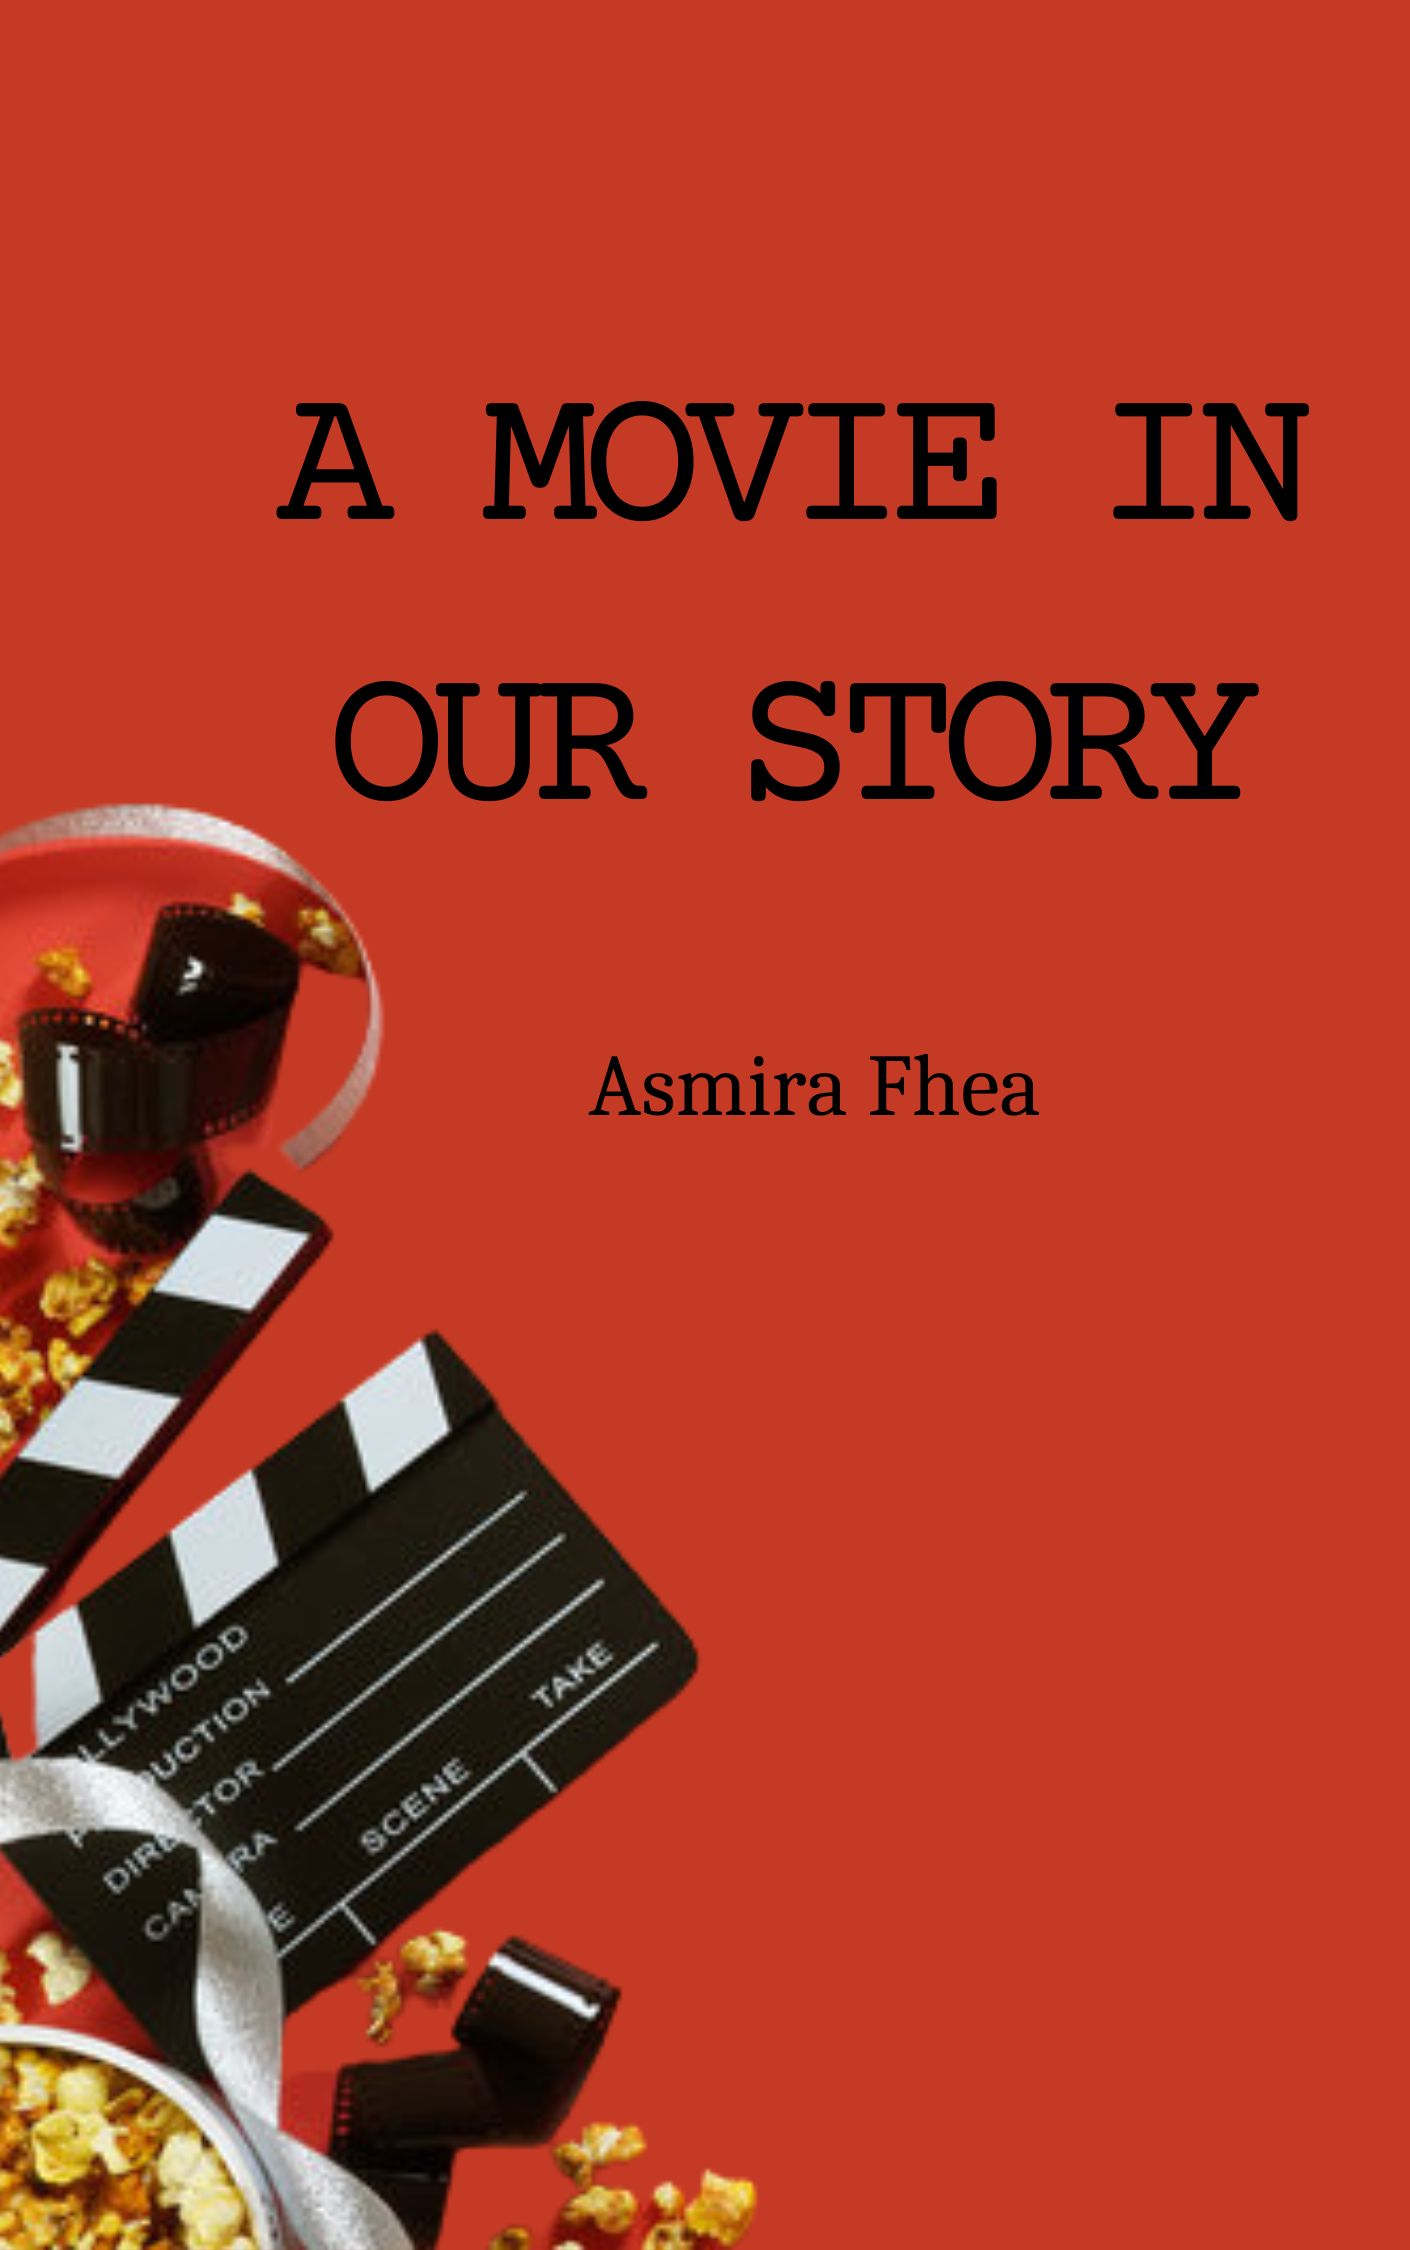 (TAMAT) A Movie In Our Story